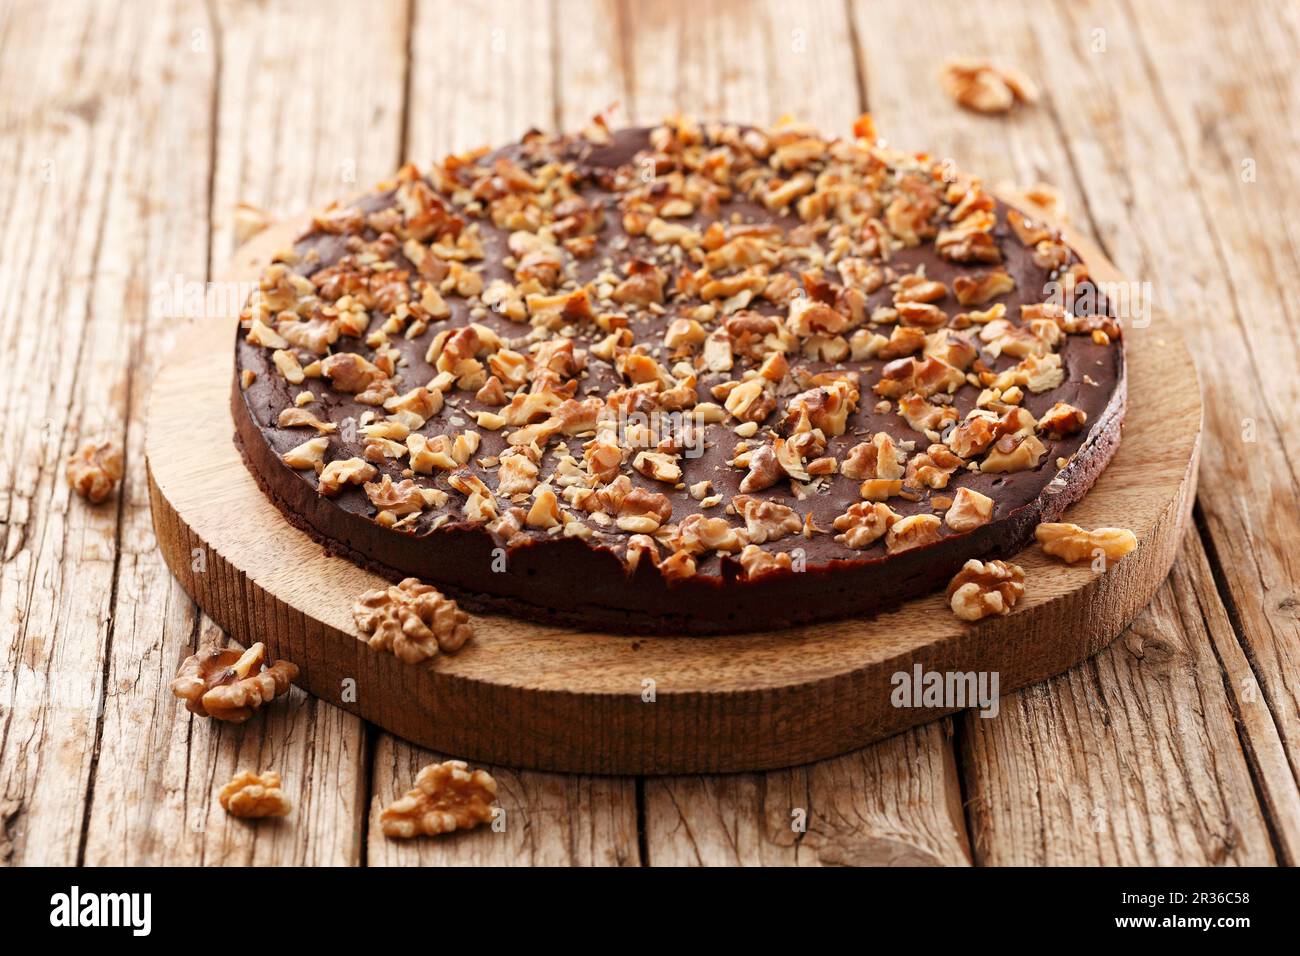 Bean and chocolate cake with walnuts Stock Photo